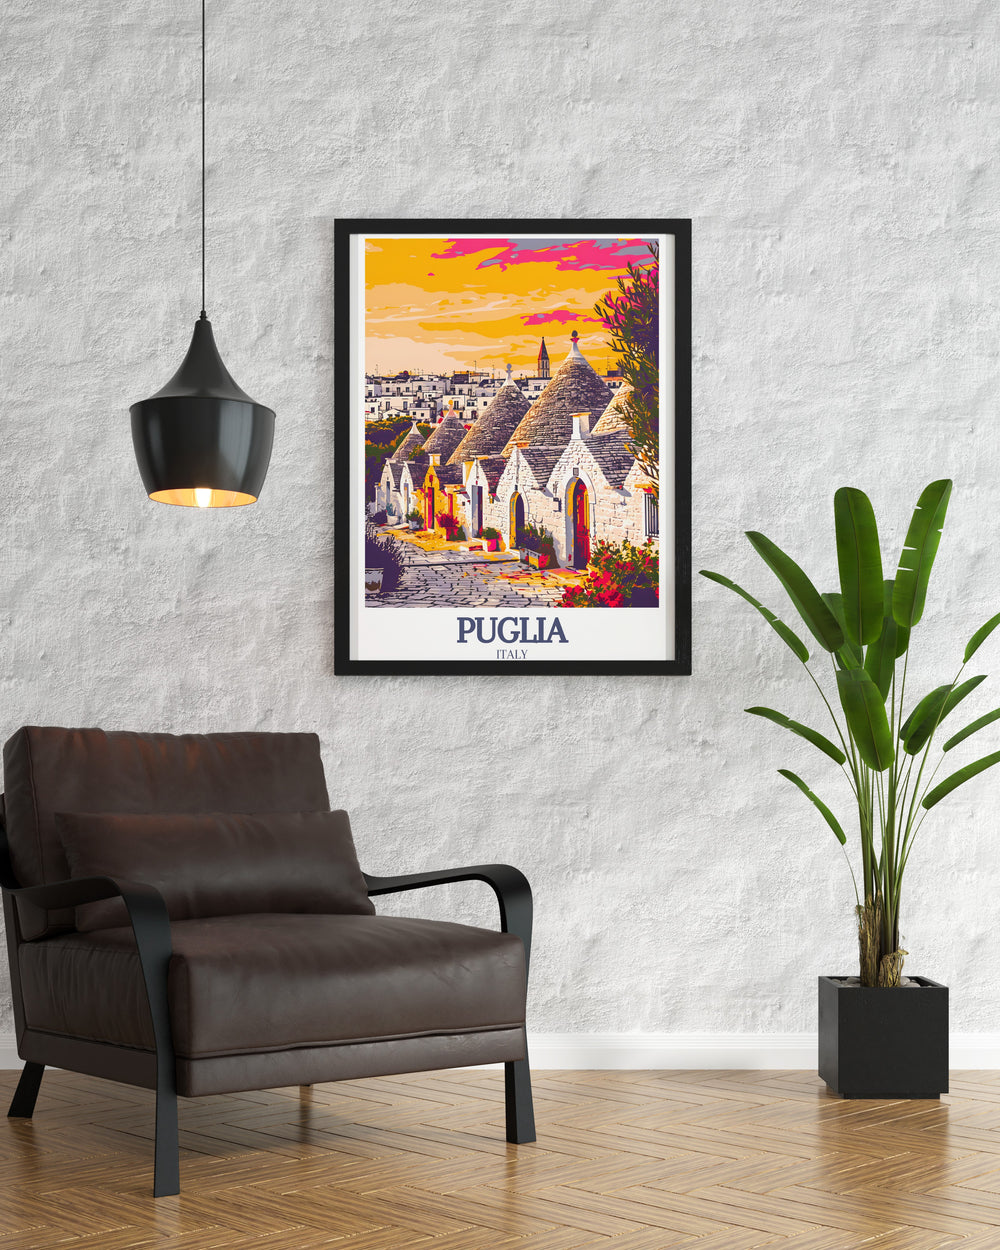 Elevate your living space with our Puglia Art featuring Trulli houses in Alberobello. This Italy Wall Poster showcases the iconic Trulli houses, adding a touch of elegance and sophistication to any room